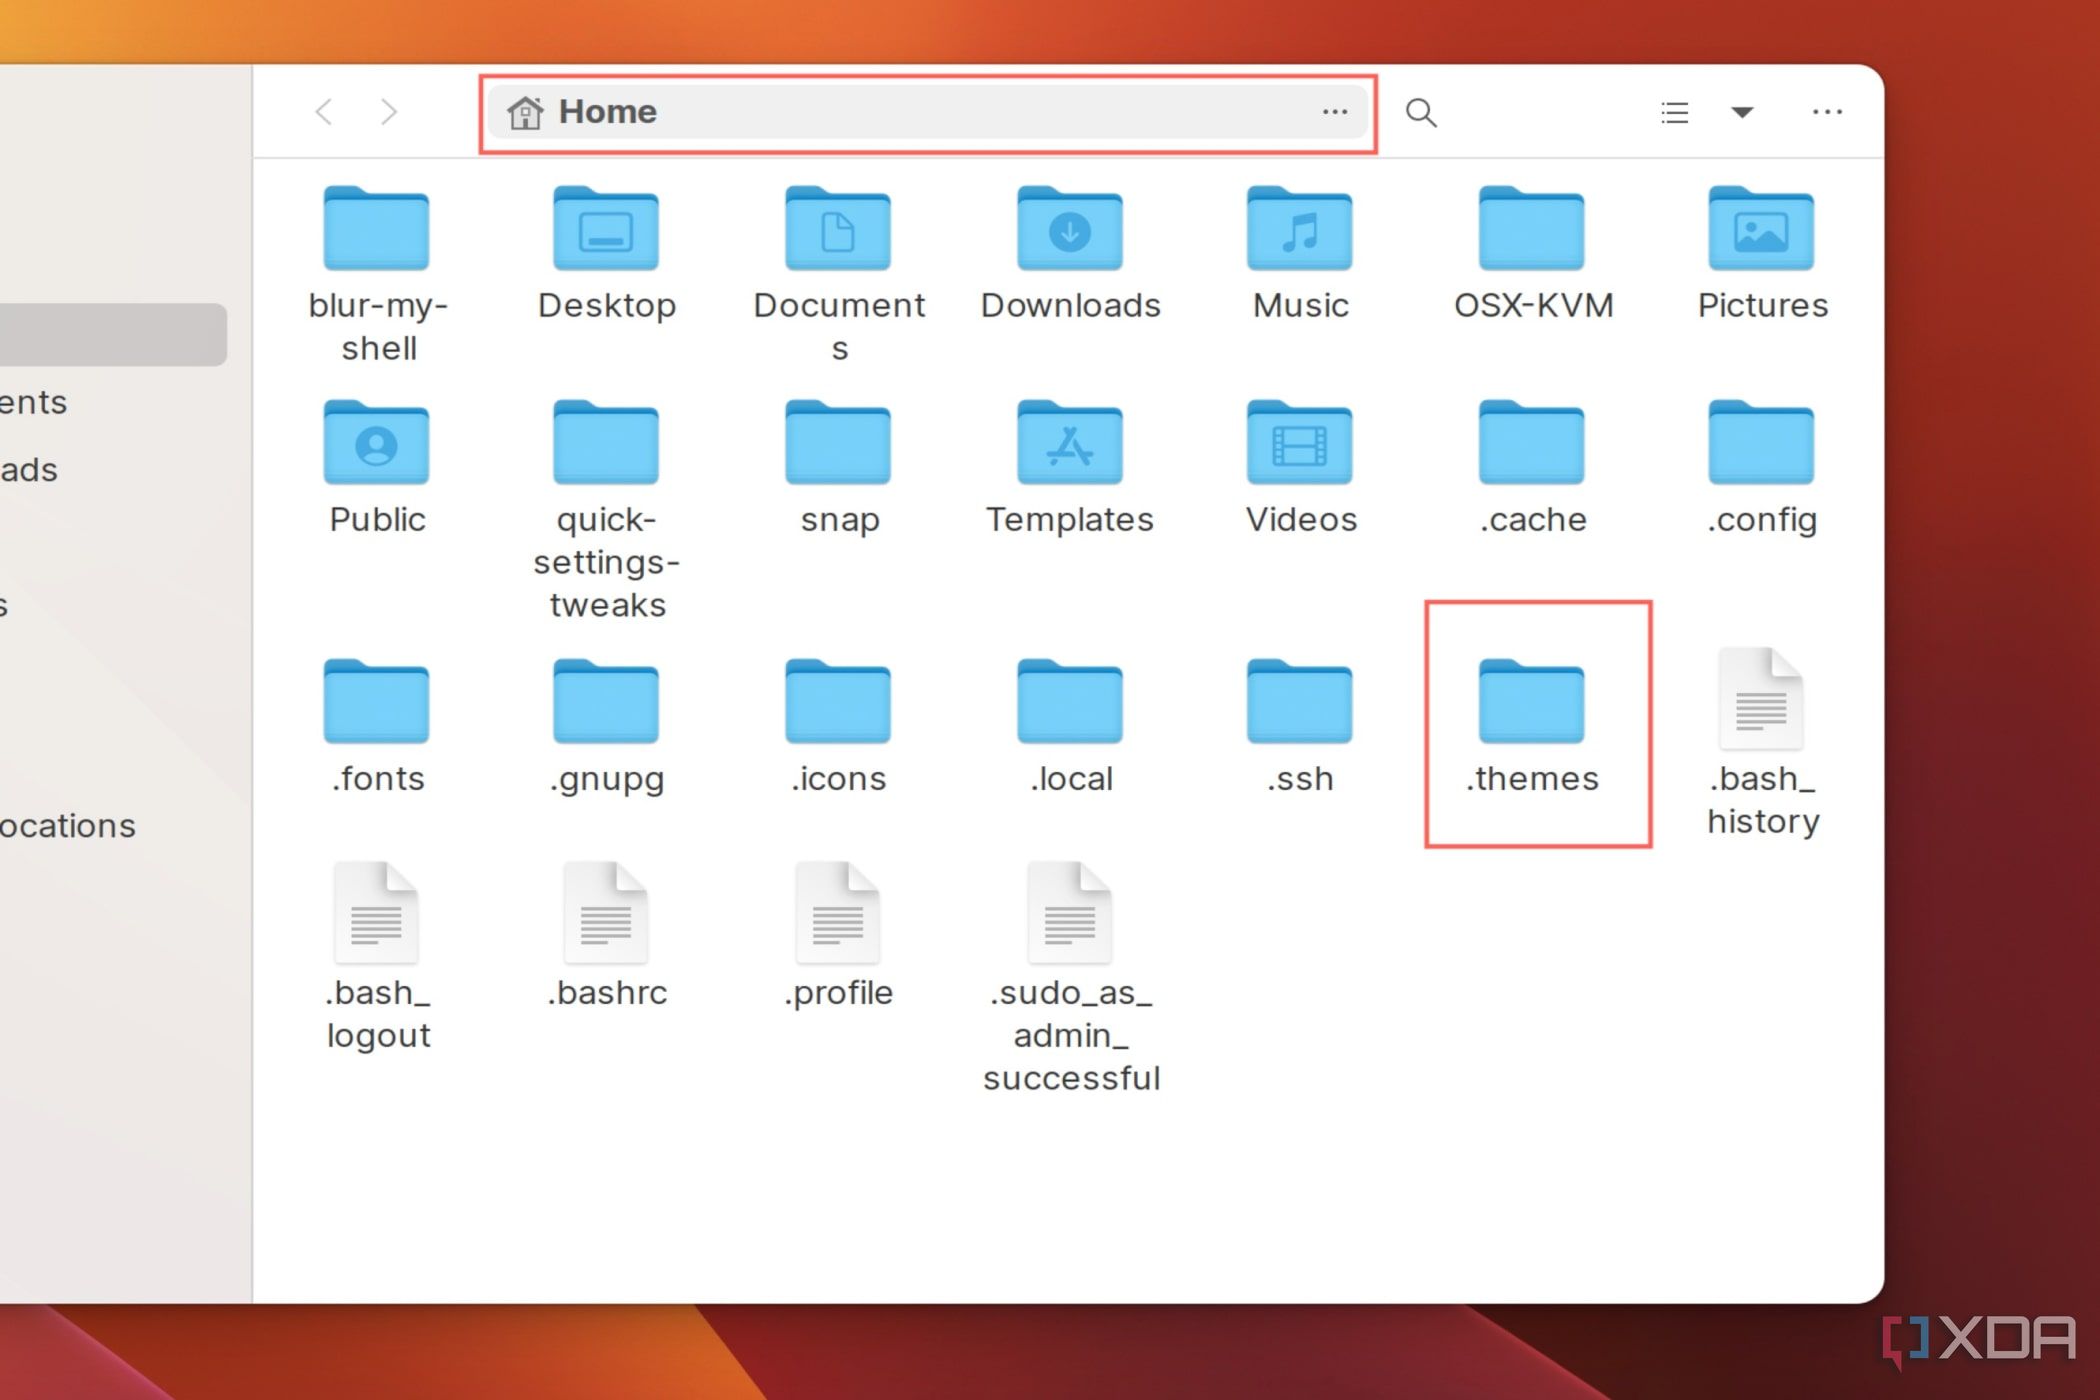 A screenshot of the Ubuntu File Manager with the Home directory and .themes folder highlighted